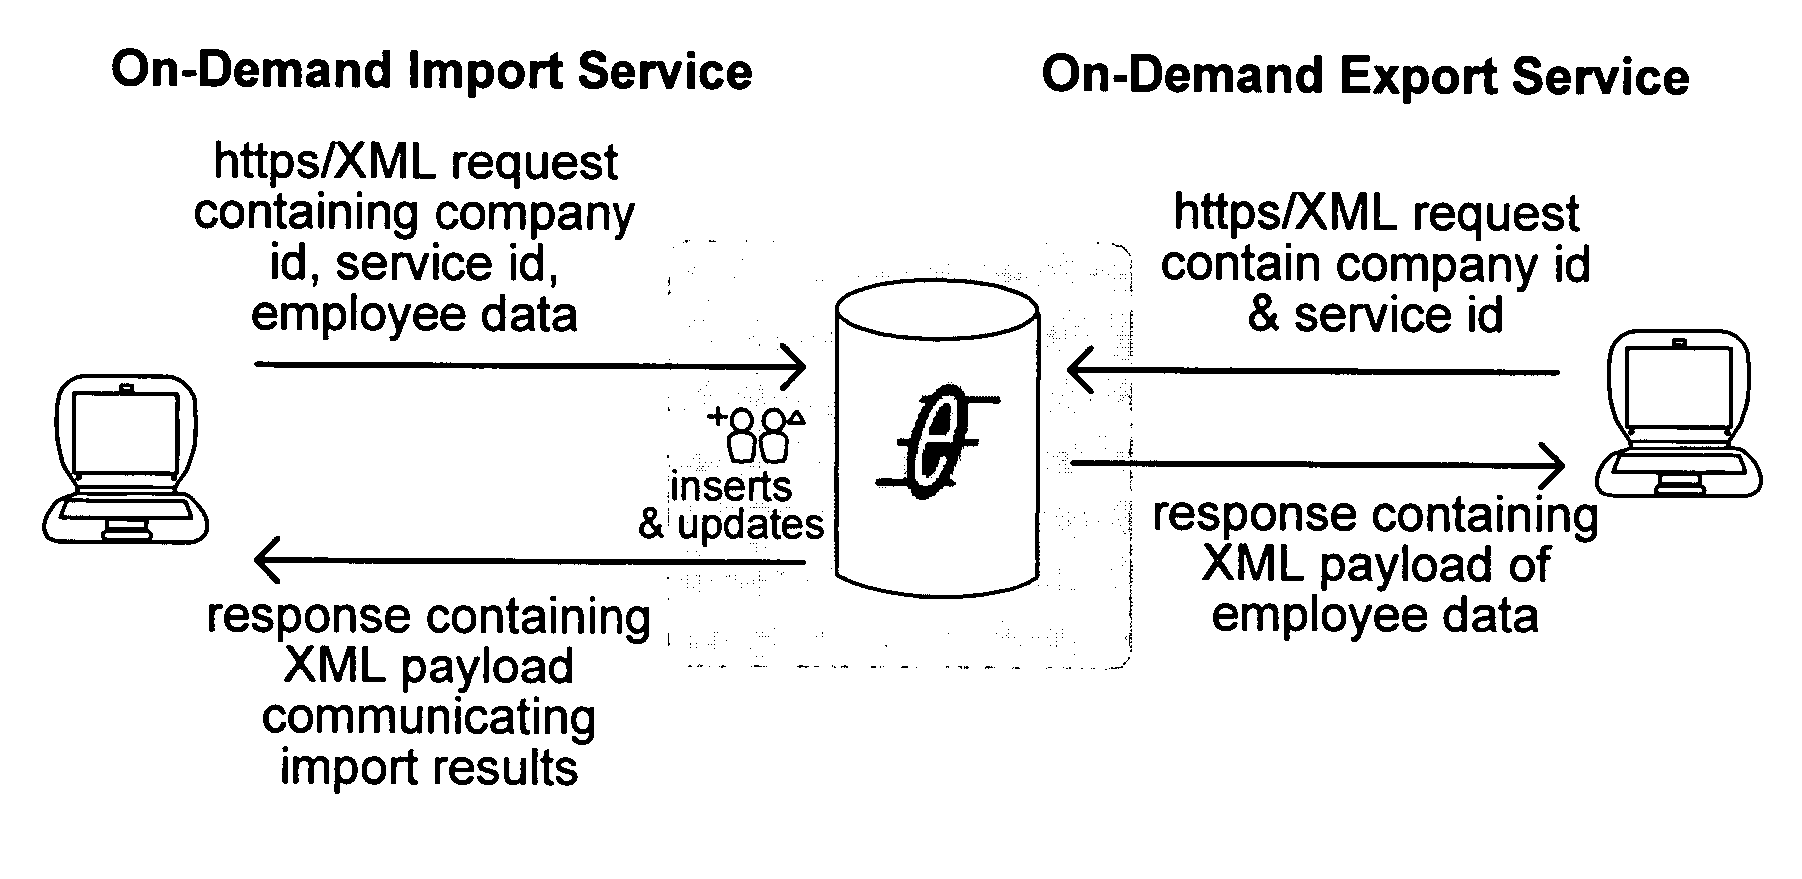 Providing on-demand access to services in a wide area network